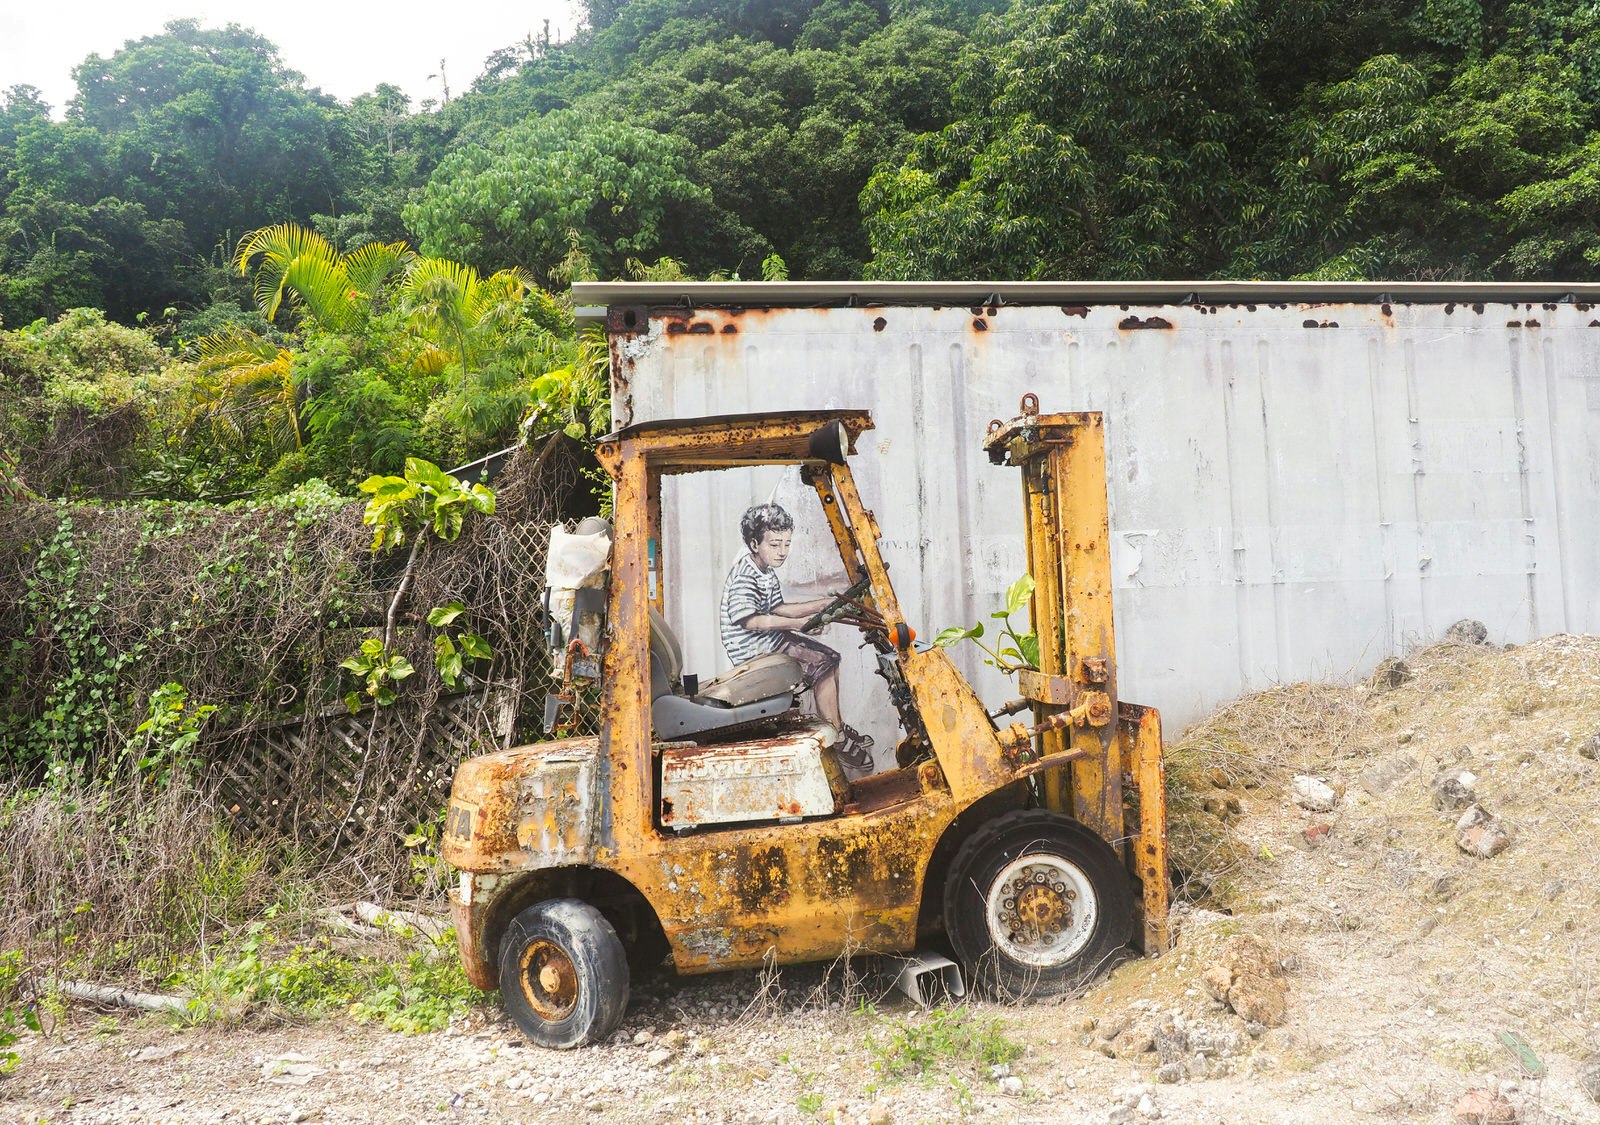 A forlorn forklift is parked next to an old shipping container; an image of a boy has been painted on the container to look as if he is driving the forklift